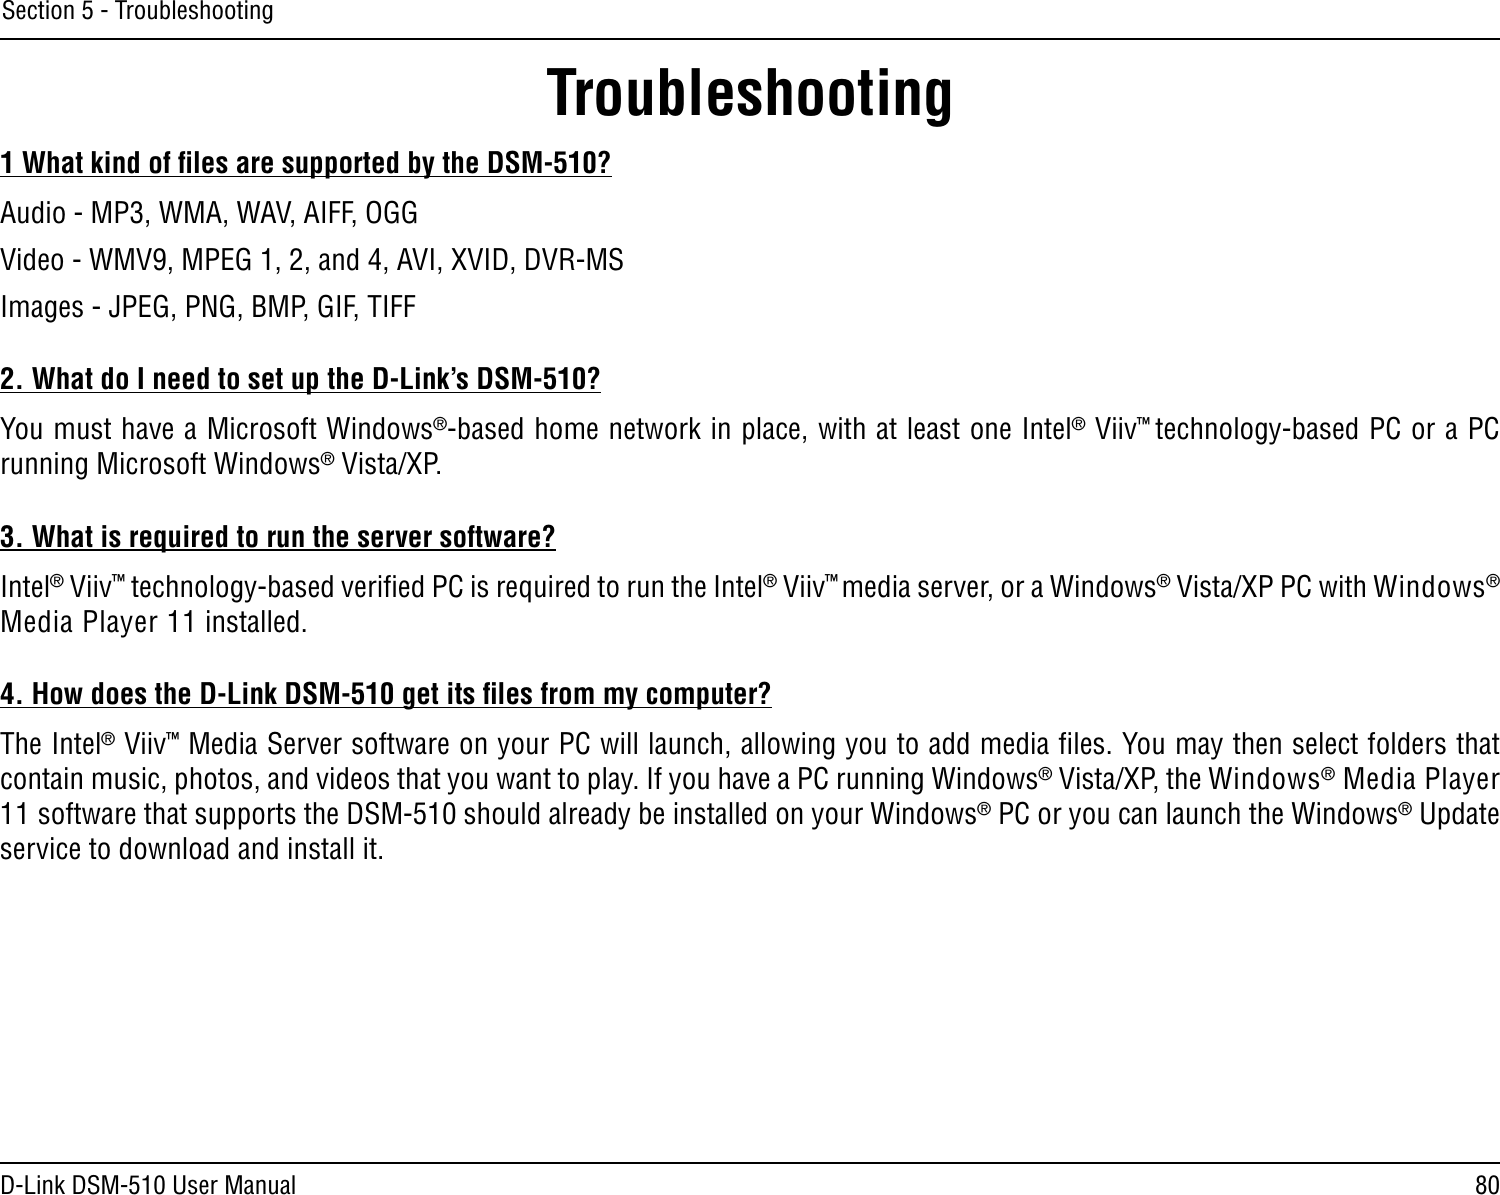 80D-Link DSM-510 User ManualSection 5 - Troubleshooting1 What kind of ﬁles are supported by the DSM-510?Audio - MP3, WMA, WAV, AIFF, OGGVideo - WMV9, MPEG 1, 2, and 4, AVI, XVID, DVR-MSImages - JPEG, PNG, BMP, GIF, TIFF2. What do I need to set up the D-Link’s DSM-510?You must have a Microsoft Windows®-based home network in place, with at least one Intel® Viiv™ technology-based PC or a PC running Microsoft Windows® Vista/XP.3. What is required to run the server software?Intel® Viiv™ technology-based veriﬁed PC is required to run the Intel® Viiv™ media server, or a Windows® Vista/XP PC with Windows® Media Player 11 installed.4. How does the D-Link DSM-510 get its ﬁles from my computer?The Intel® Viiv™ Media Server software on your PC will launch, allowing you to add media ﬁles. You may then select folders that contain music, photos, and videos that you want to play. If you have a PC running Windows® Vista/XP, the Windows® Media Player 11 software that supports the DSM-510 should already be installed on your Windows® PC or you can launch the Windows® Update service to download and install it.Troubleshooting